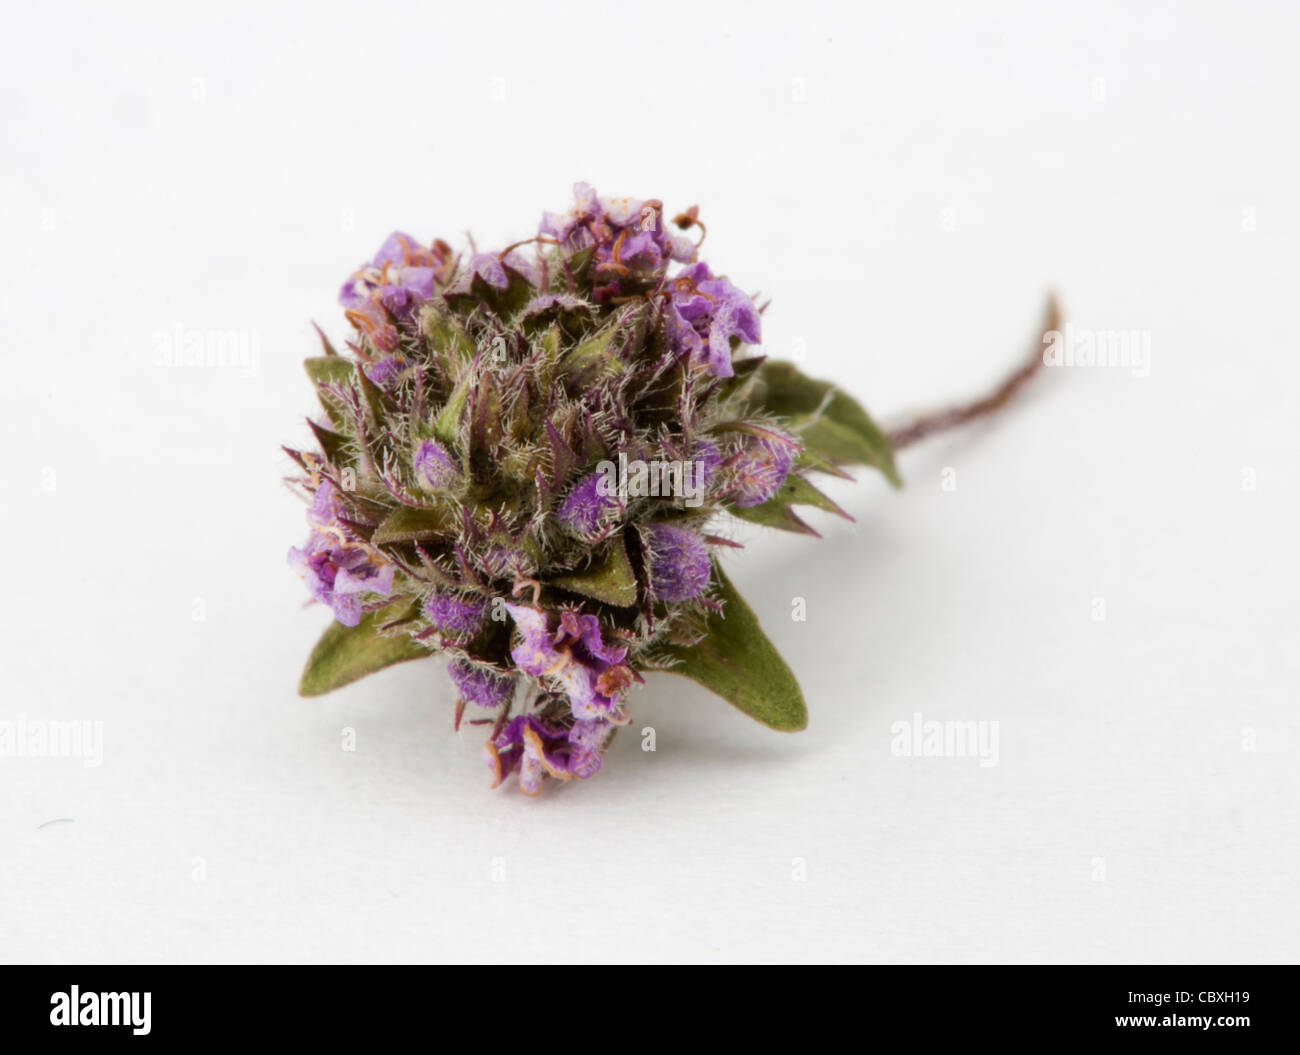 Dried thyme and leaves on white background Stock Photo